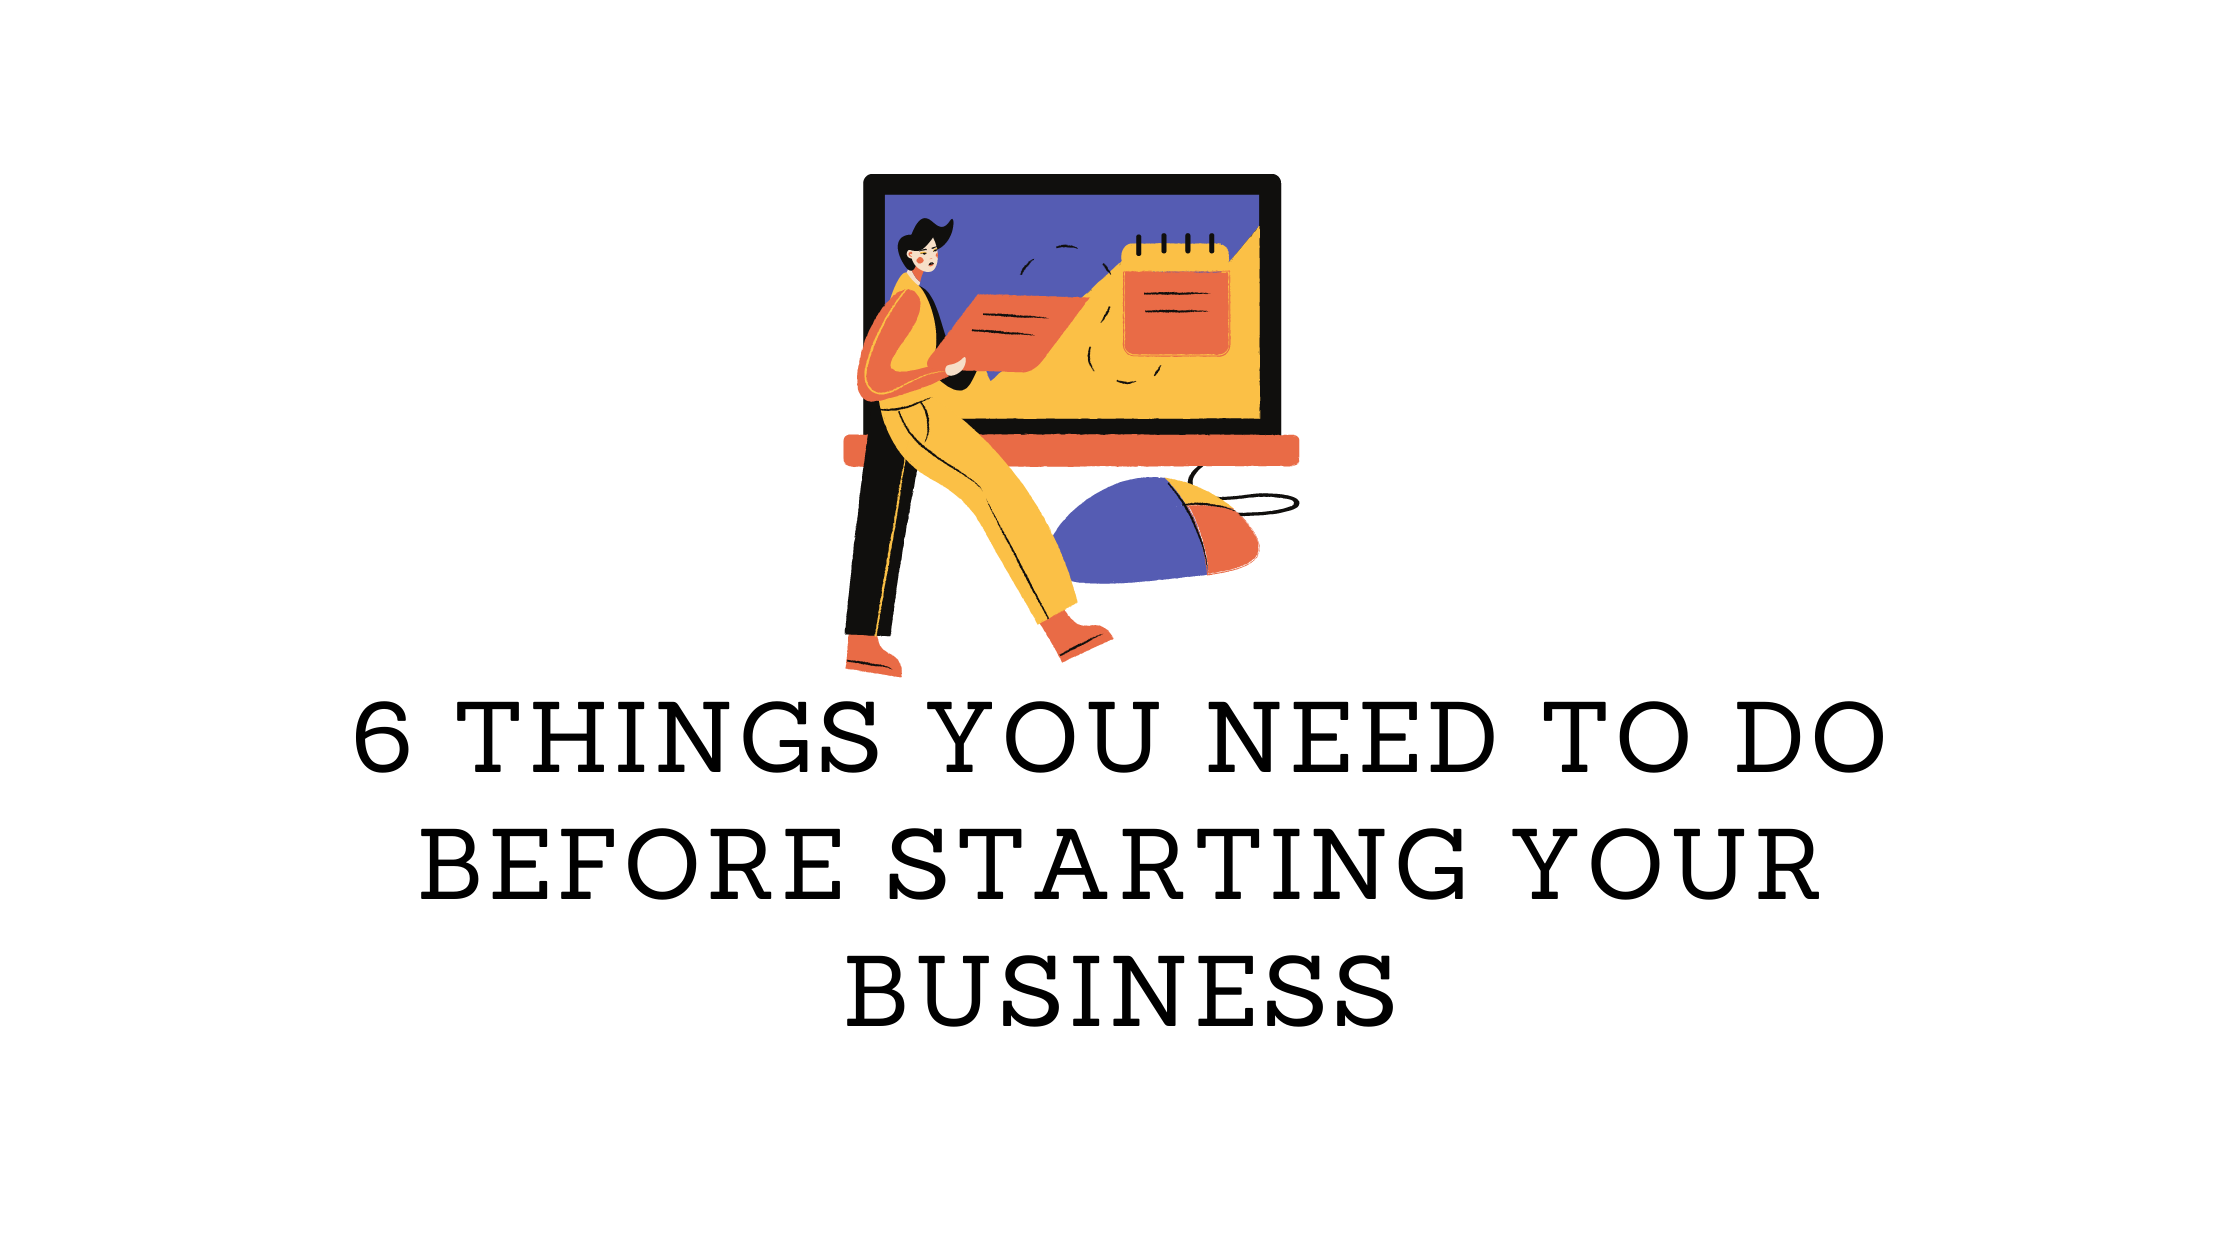 6 Things You Need to Do Before Starting Your Business